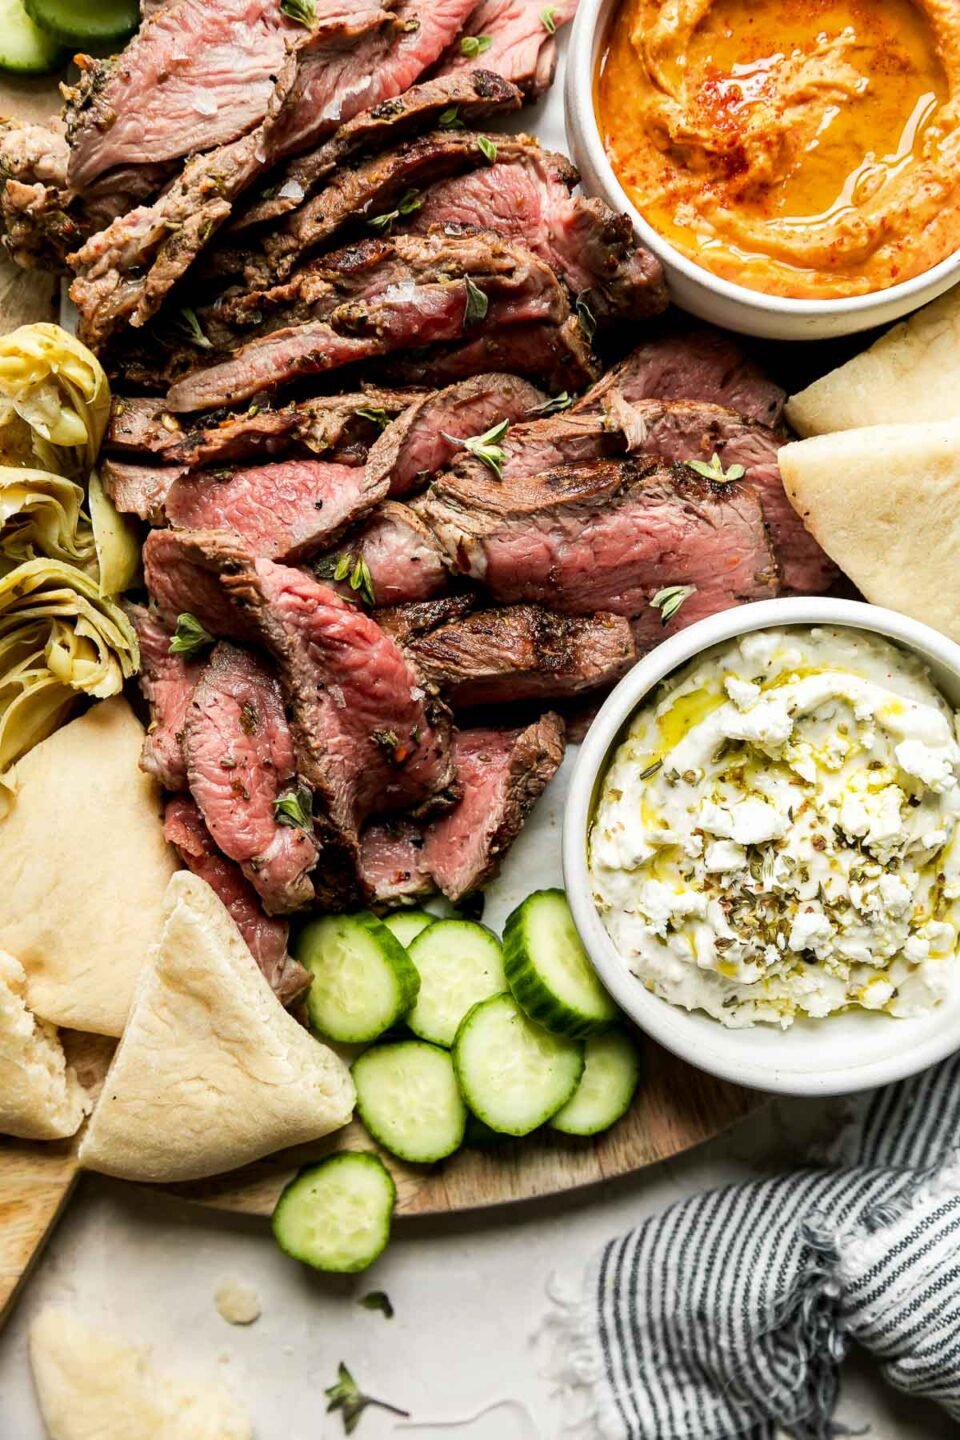 A close up of a mezze-style platter served on a round wooden board topped with thinly sliced grilled leg of lamb, sliced cucumbers, artichoke hearts, dips & spreads, and pita bread. The platter rests atop a creamy white textured surface and a blue and white striped linen napkin rests alongside.